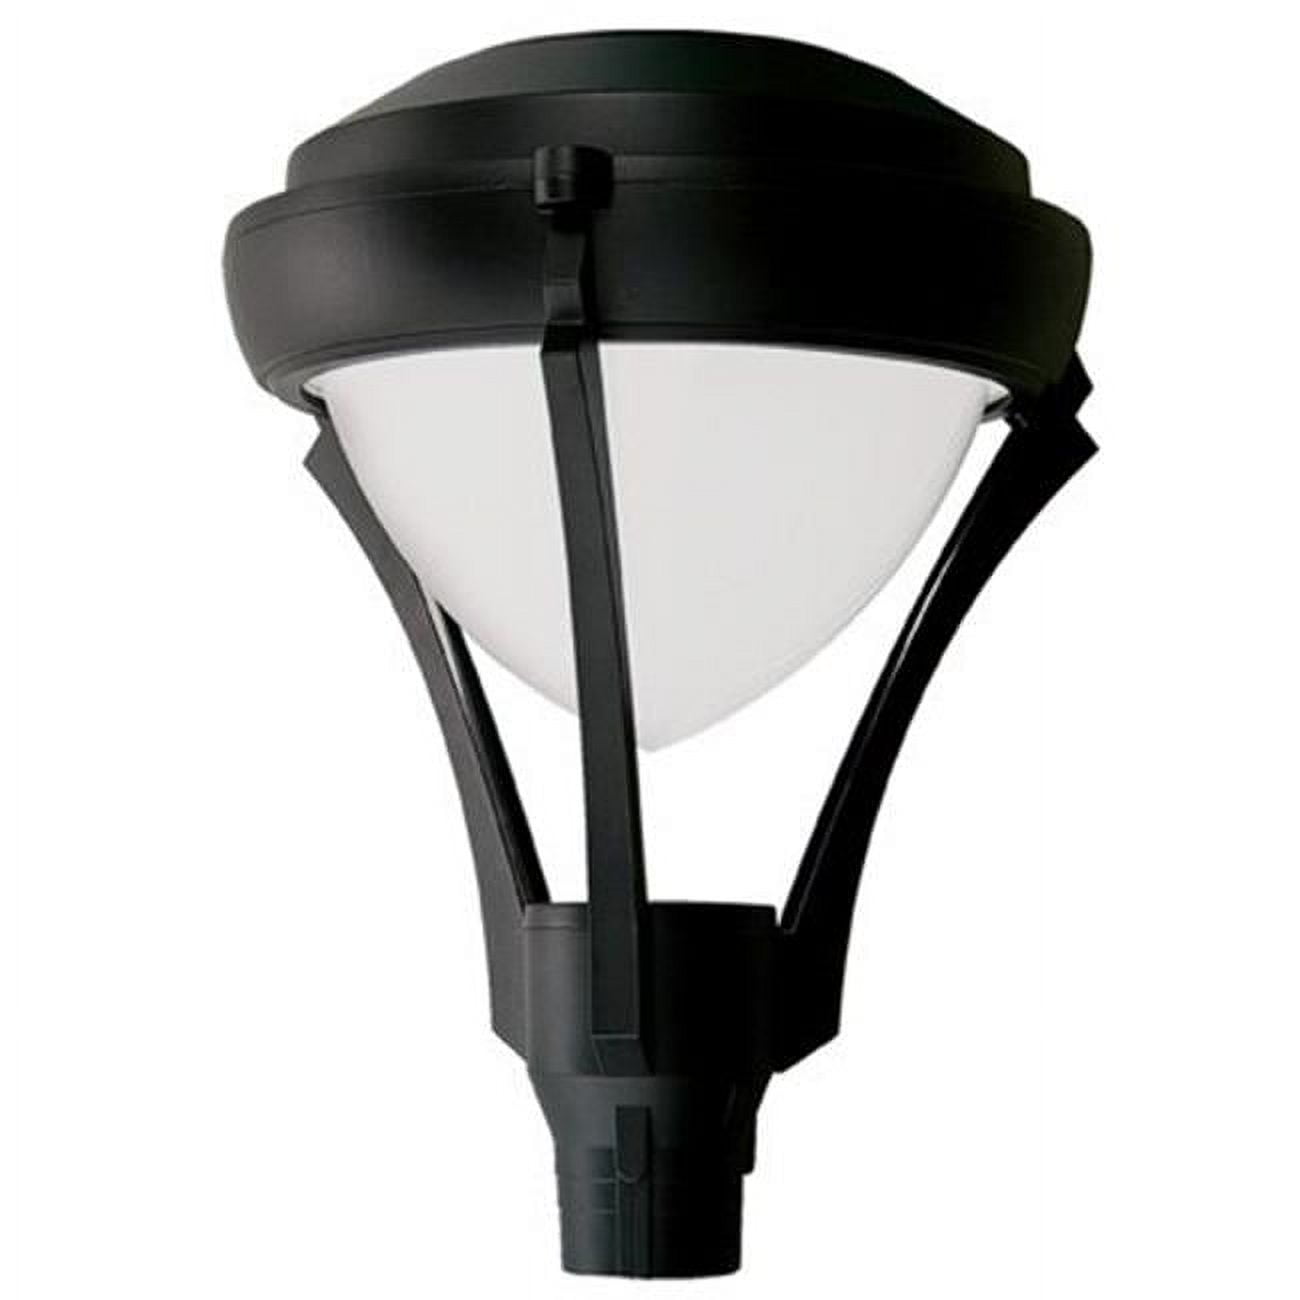 Picture of Dabmar Lighting GM592-B 70W 120V Powder Coated Cast Aluminum Post Top Light Fixture with High Pressure Sodium Lamp, Black - 27.95 x 21.65 x 21.65 in.